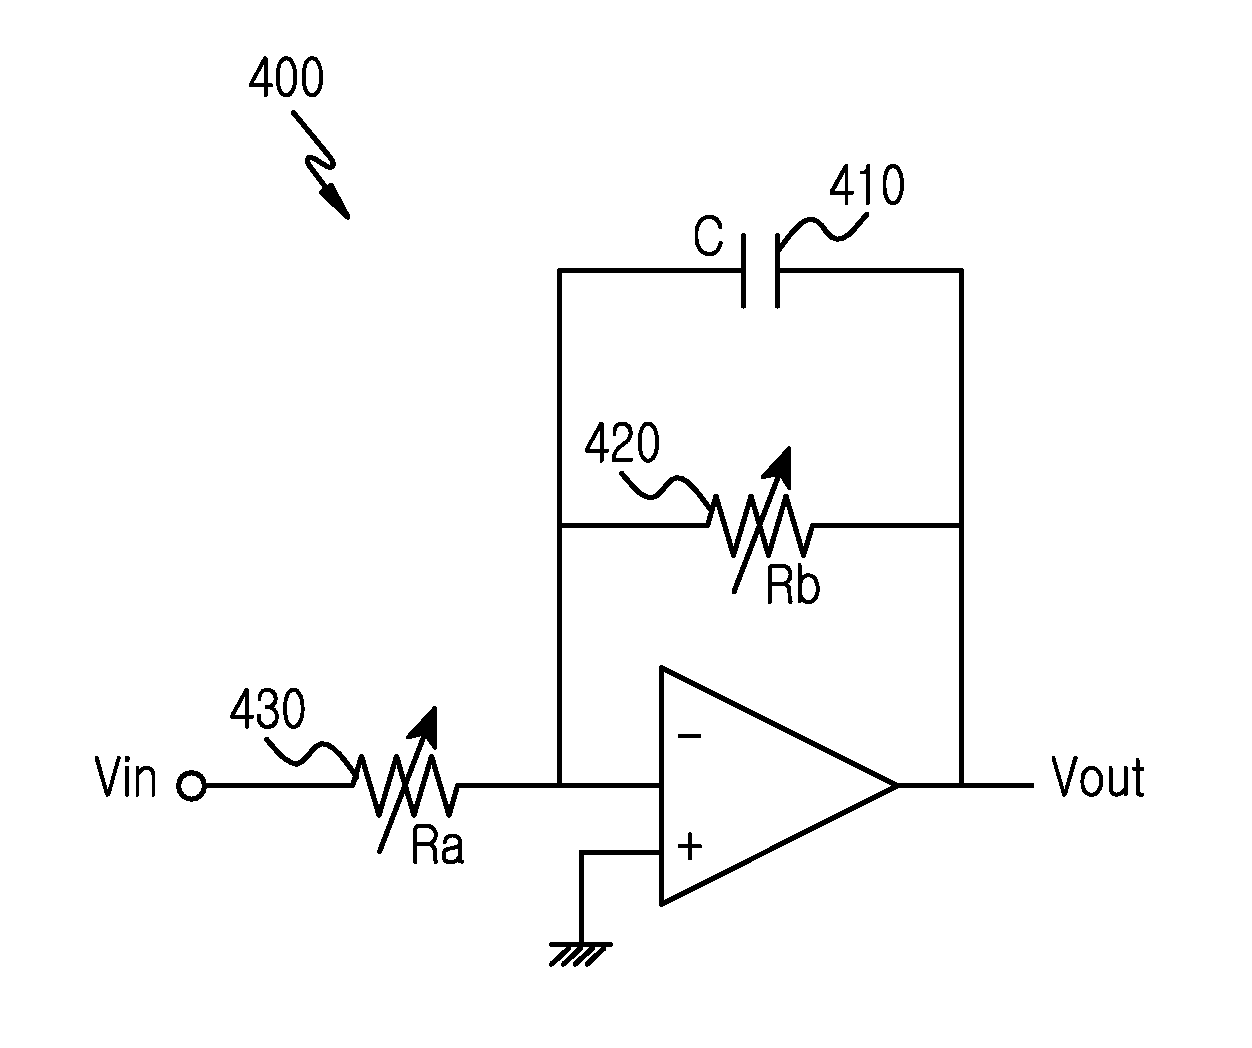 Amplifier and filter having variable gain and cutoff frequency controlled logarithmically according to digital code